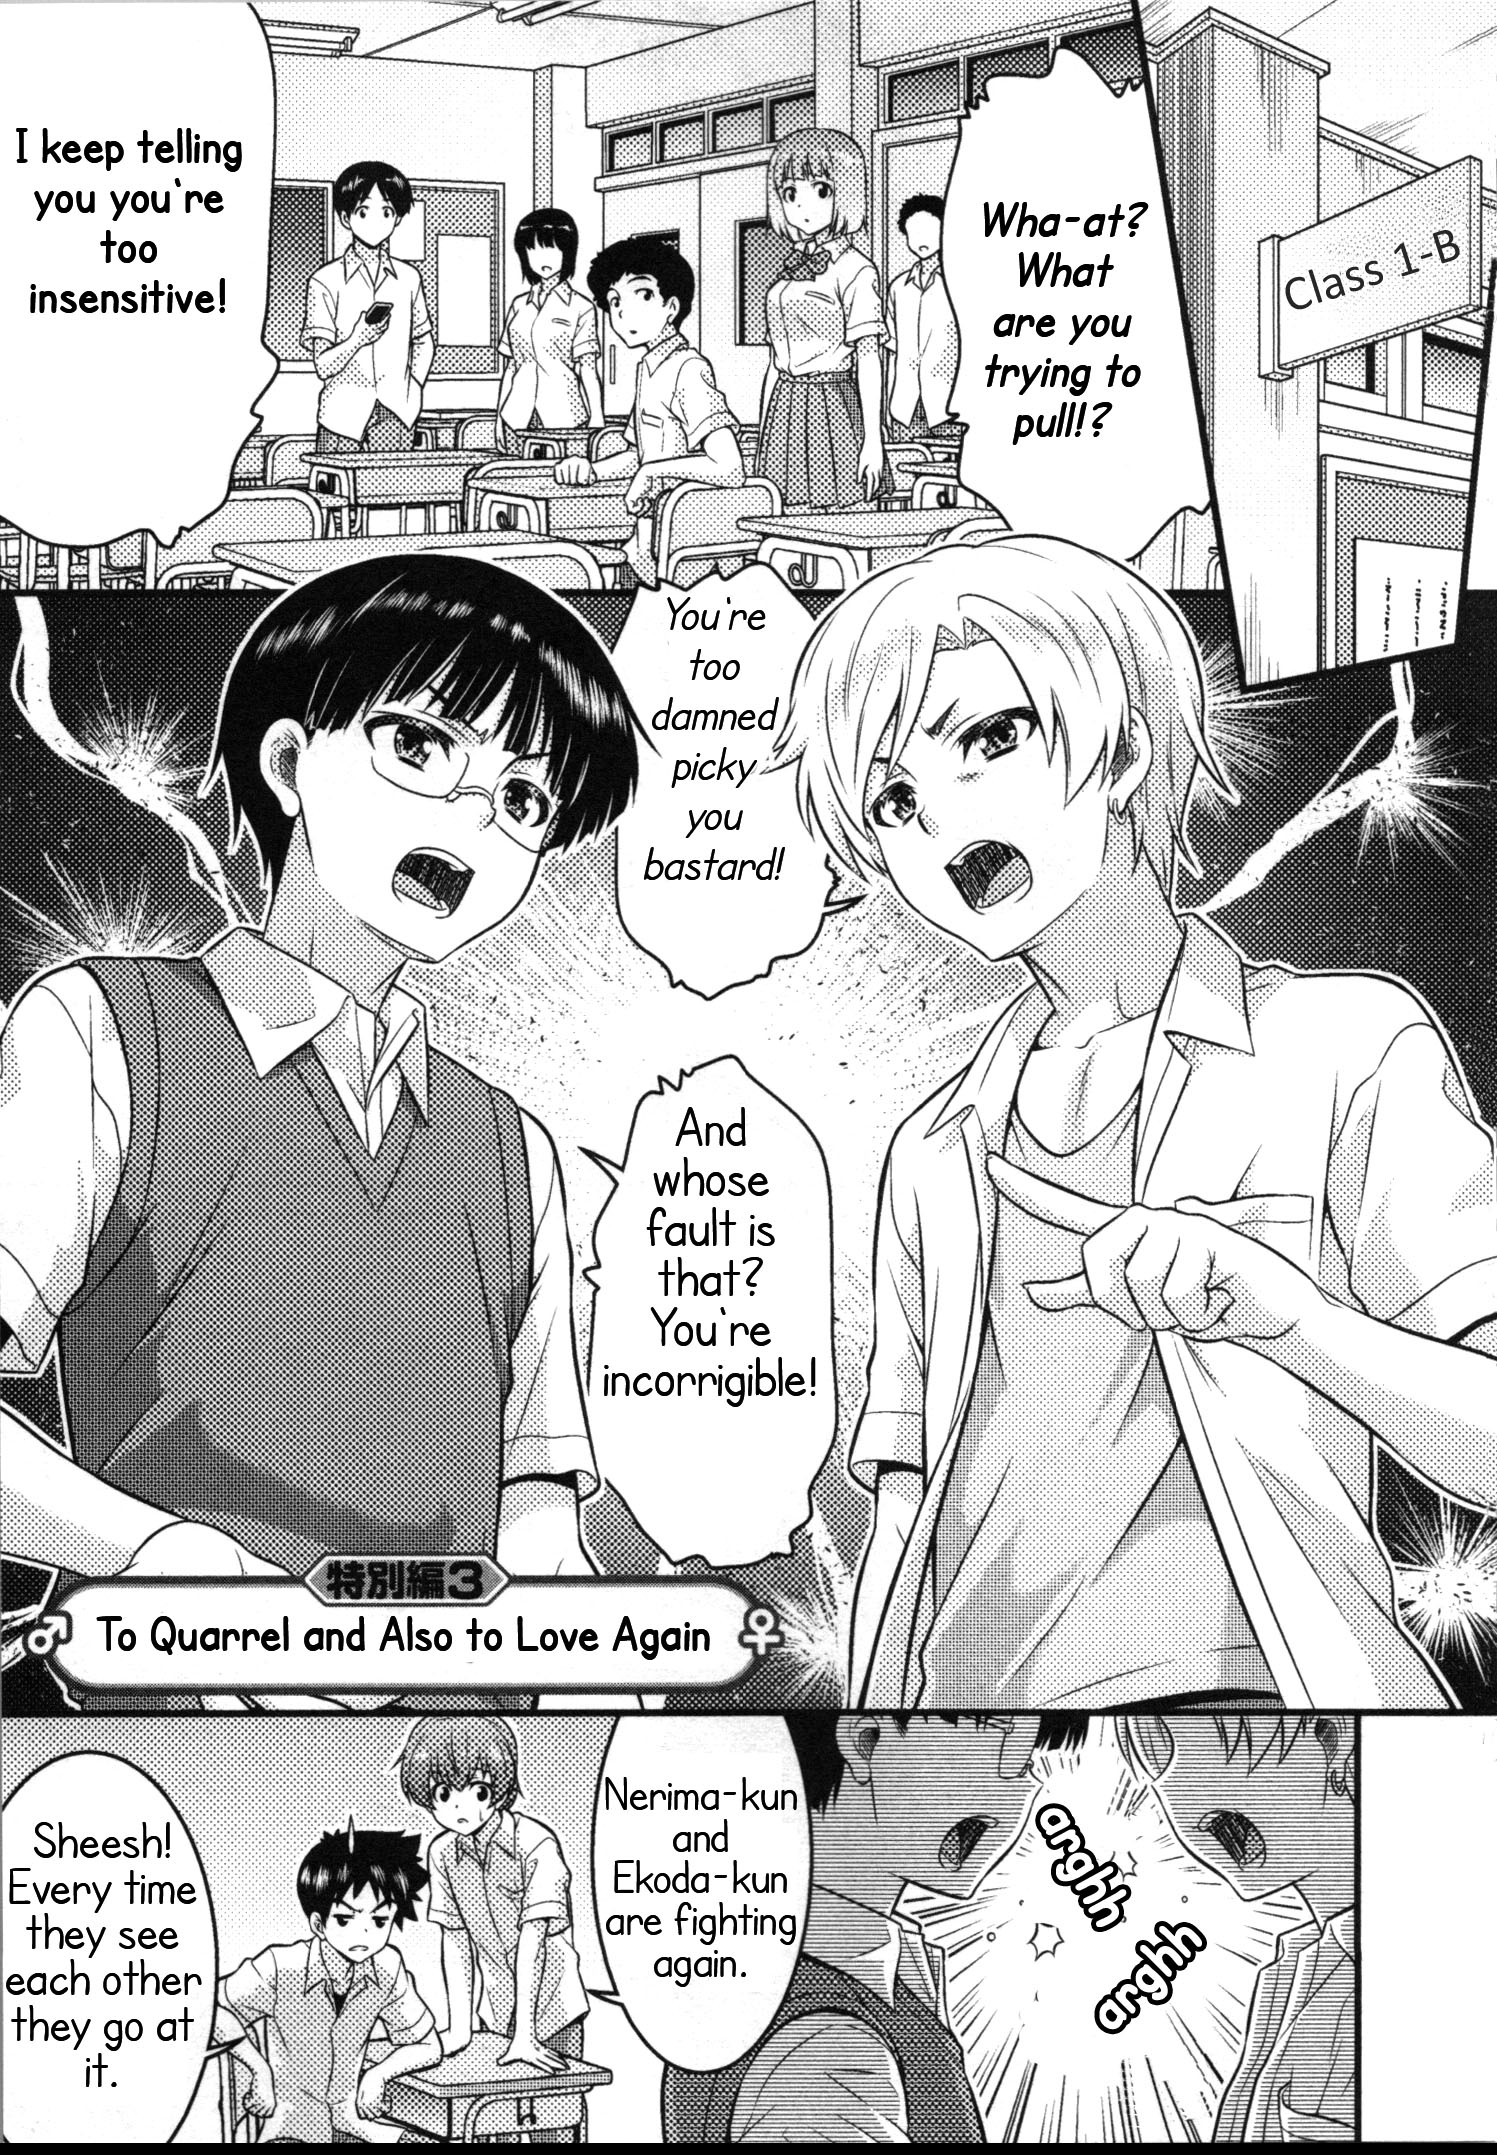 Daily Life In Ts School Vol.3 Chapter 12.5: To Quarrel And Also To Love Again - Picture 1